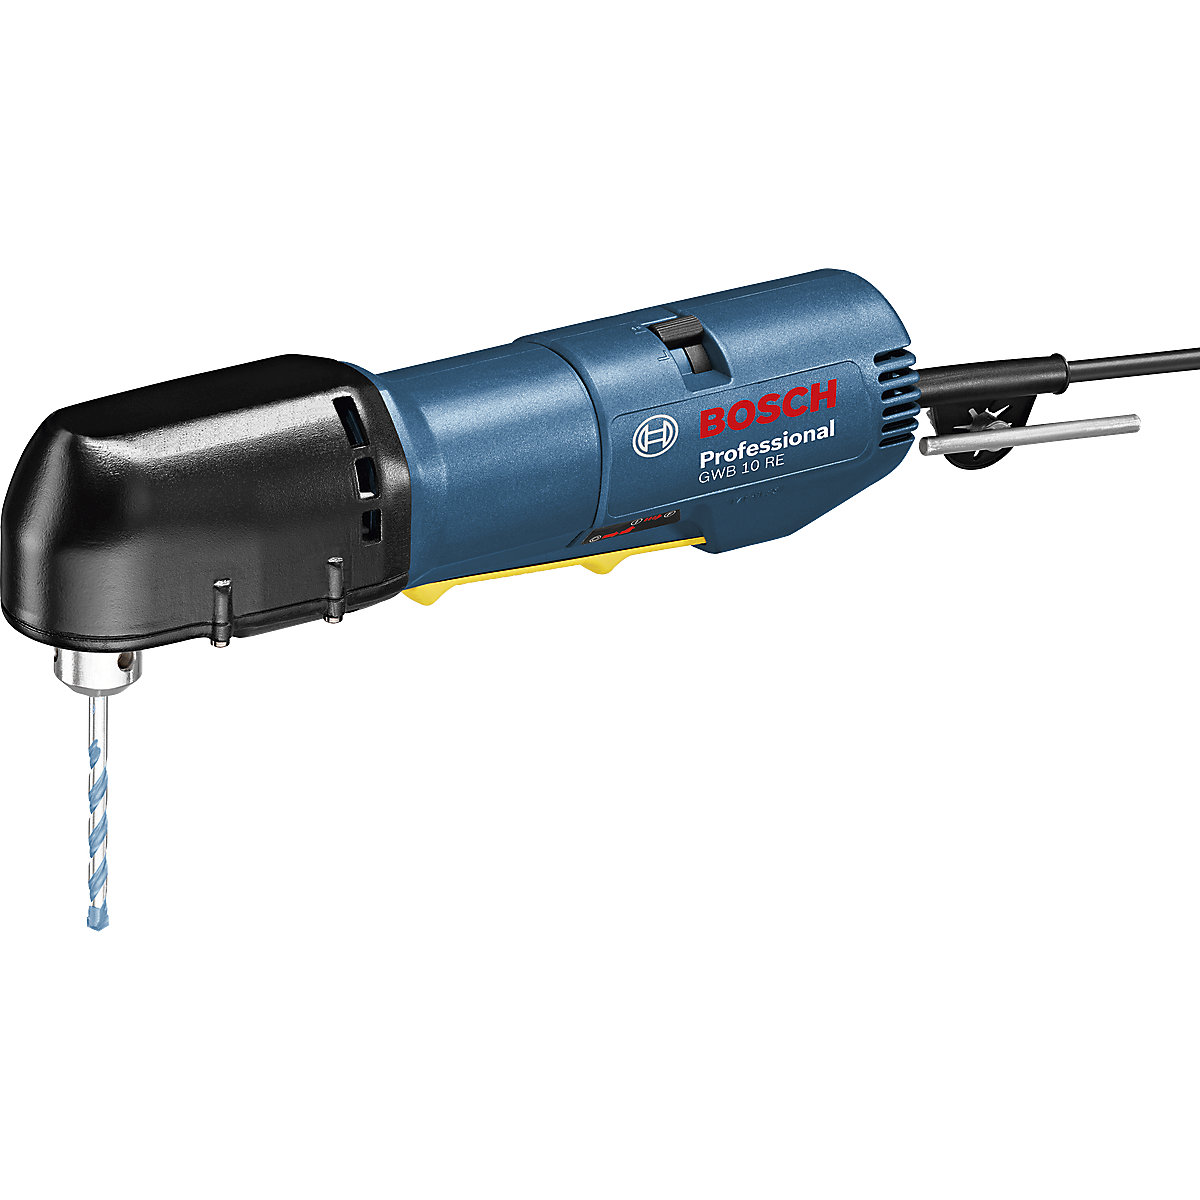 Perceuse angulaire GWB 10 RE Professional - Bosch